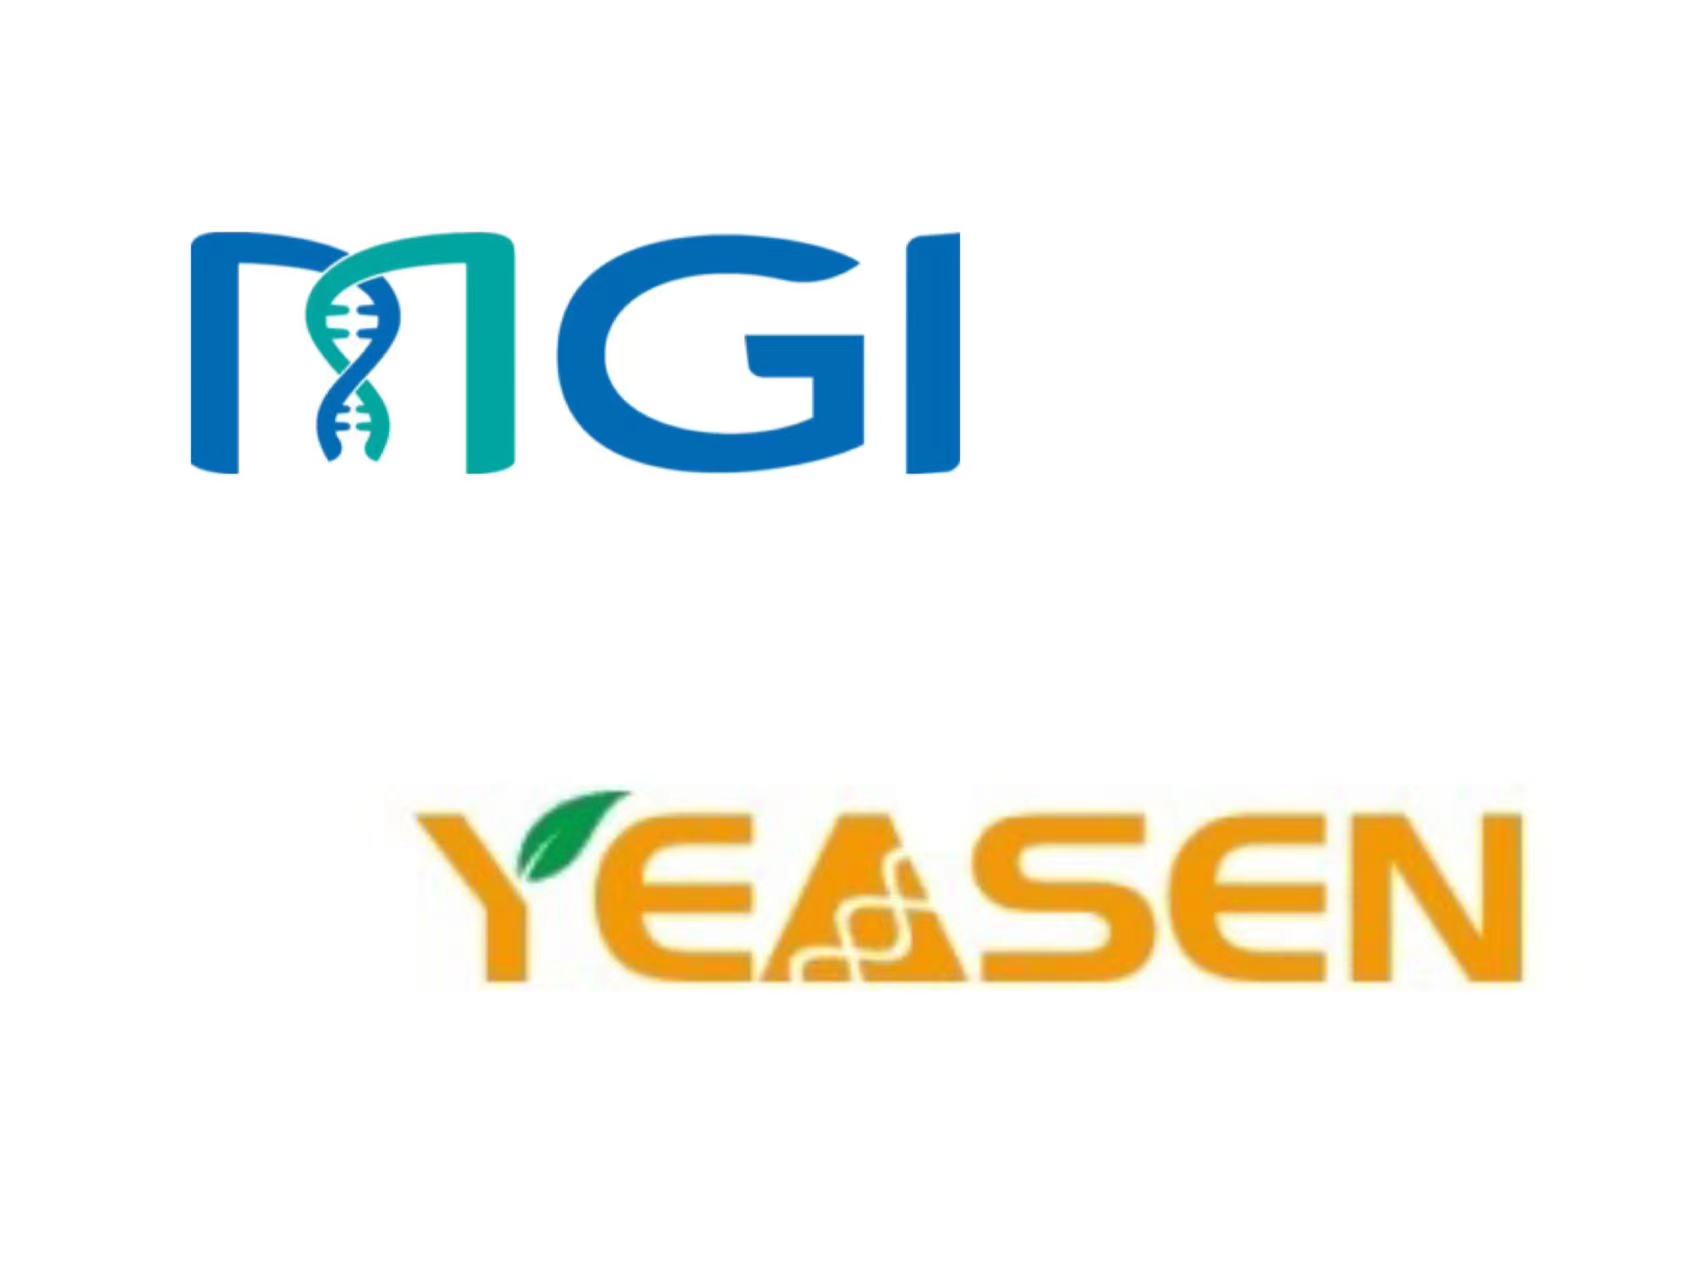 MGI Tech and Yeasen reached a strategic cooperation